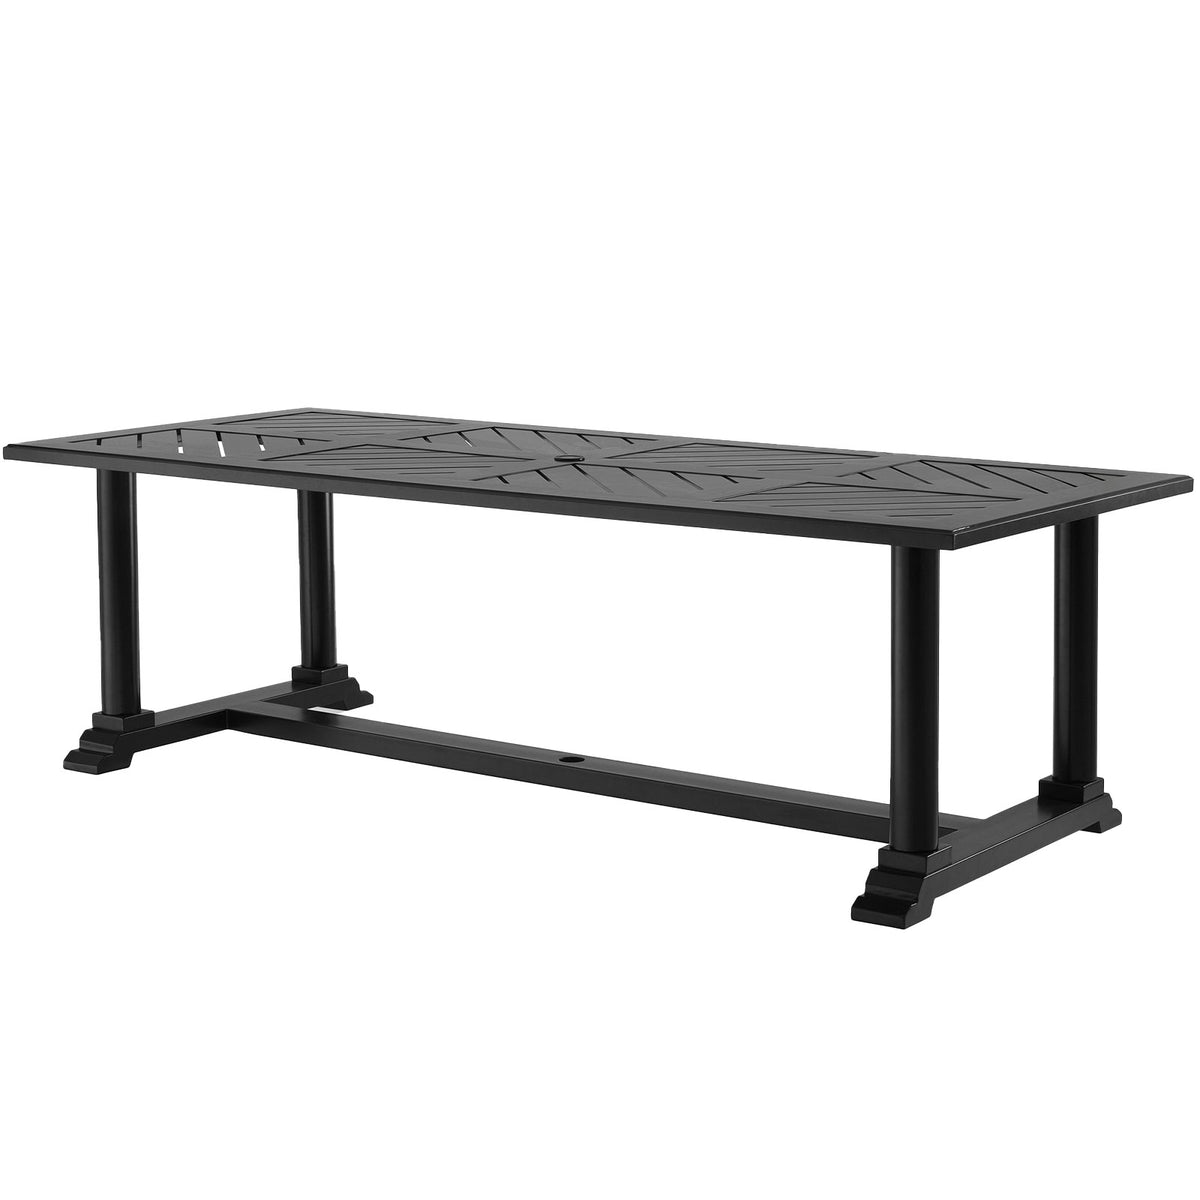 Bell Rive Outdoor Dining Table, Black